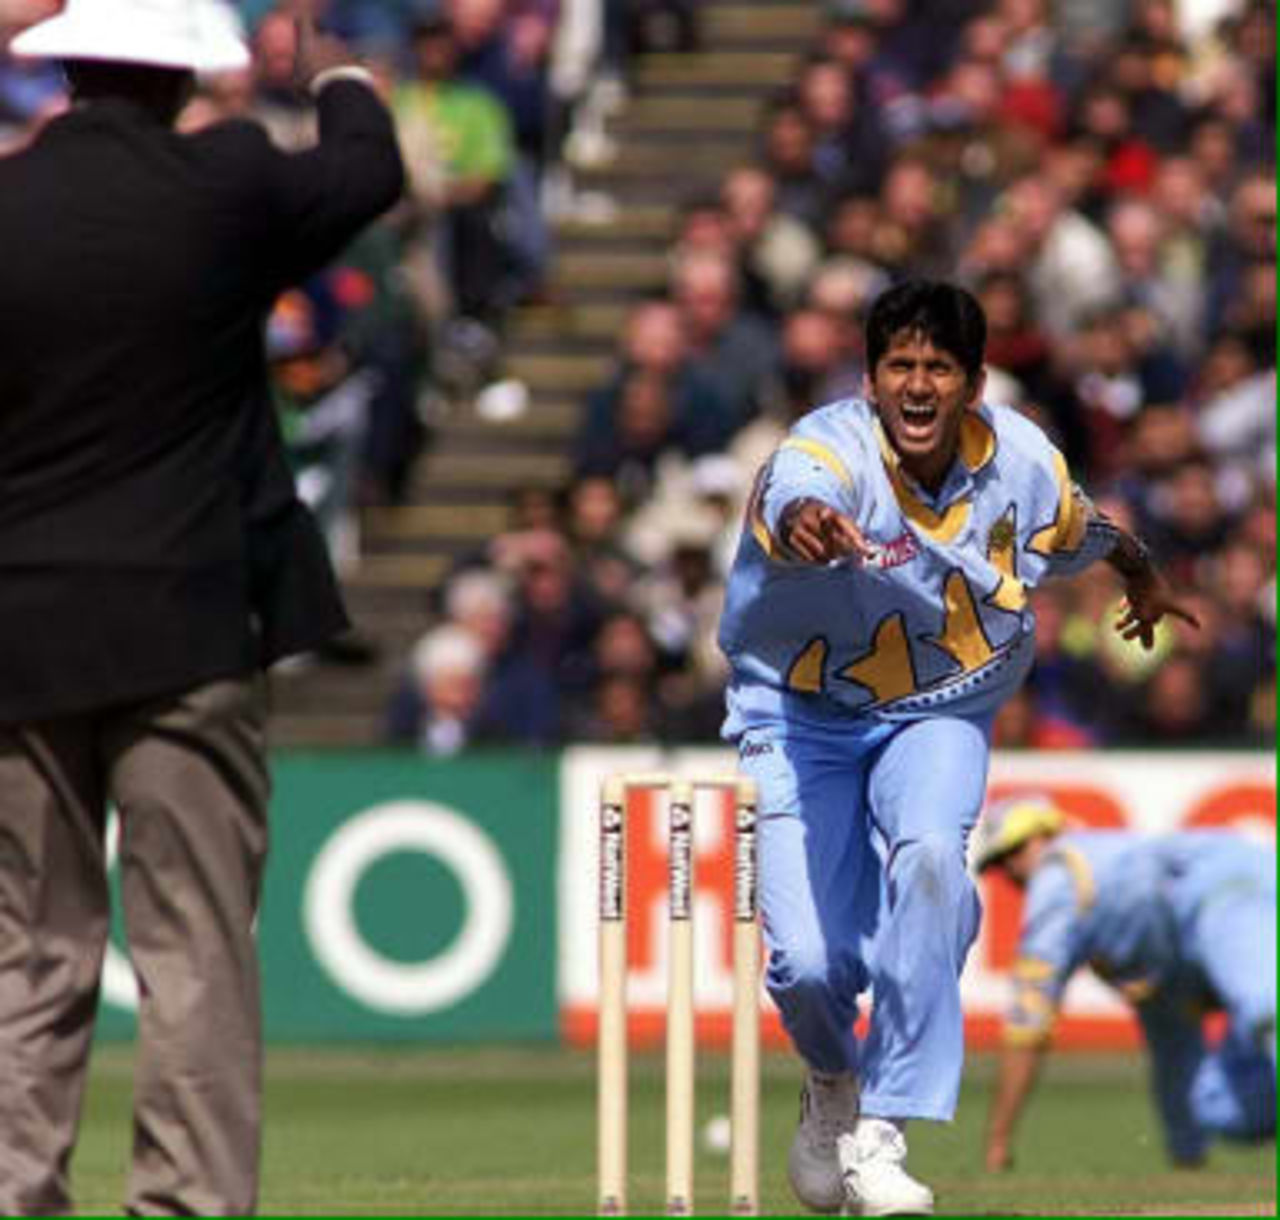 India's Venkatesh Prasad successfully appeals for the wicket of Pakistan's Salim Malik during their Super Six Cricket World Cup match at Old Trafford,Manchester 08 June 1999.